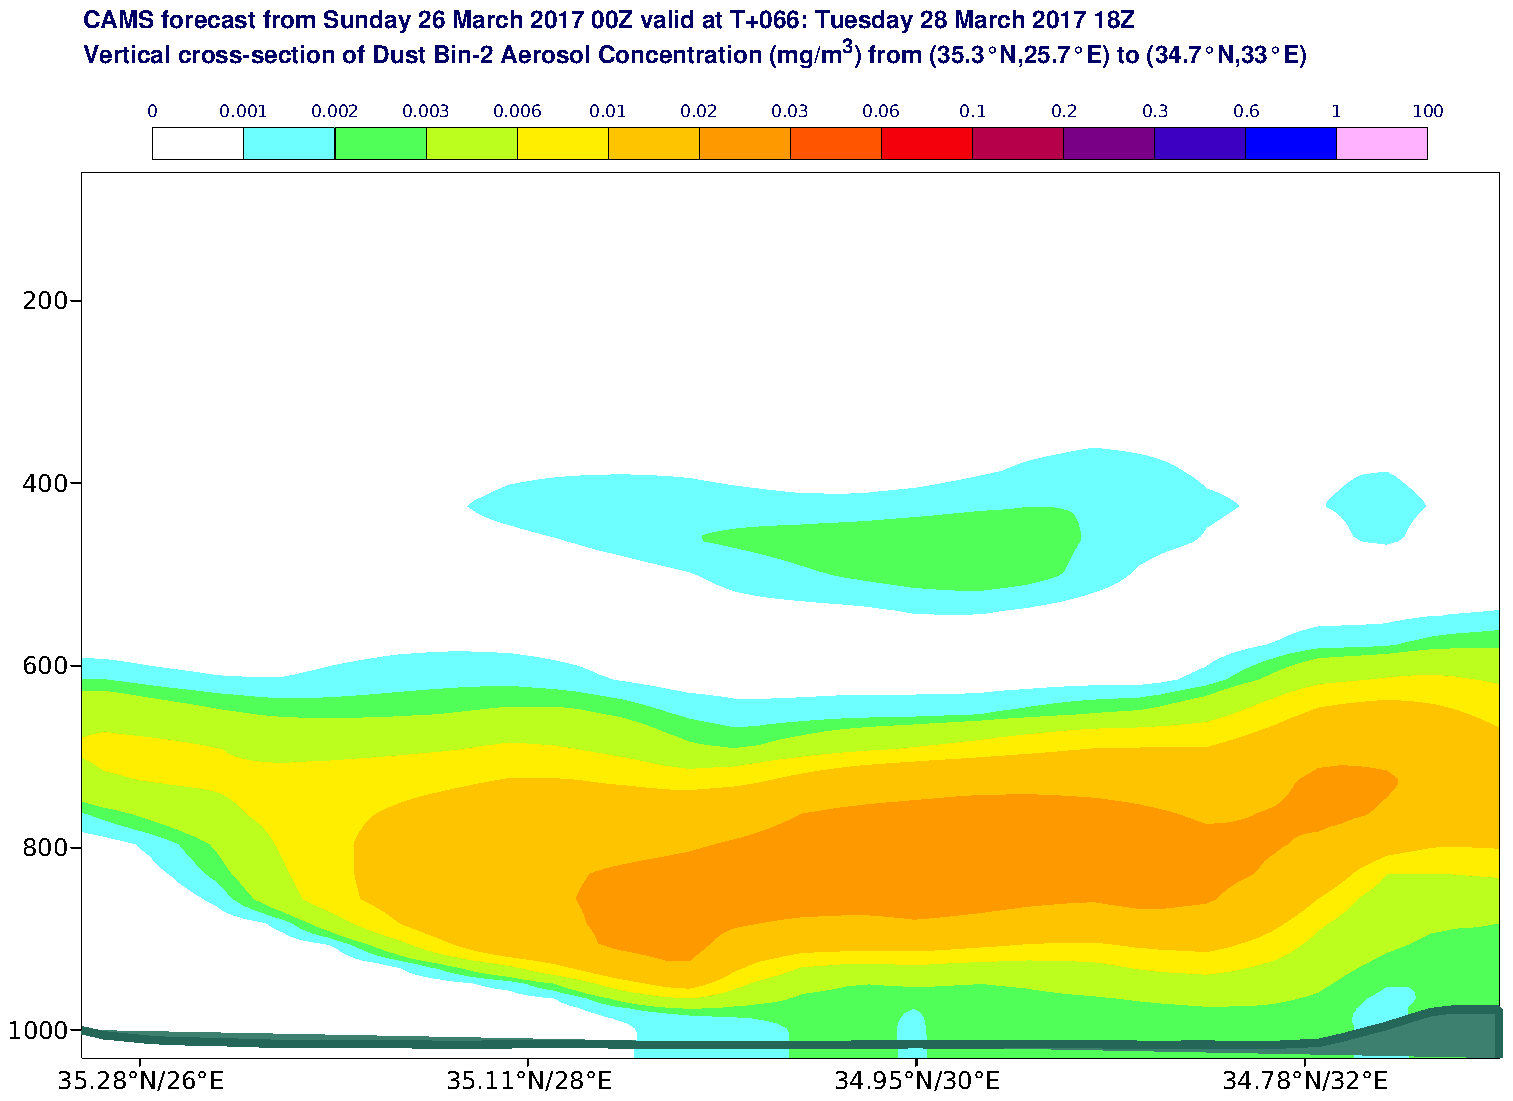 Vertical cross-section of Dust Bin-2 Aerosol Concentration (mg/m3) valid at T66 - 2017-03-28 18:00